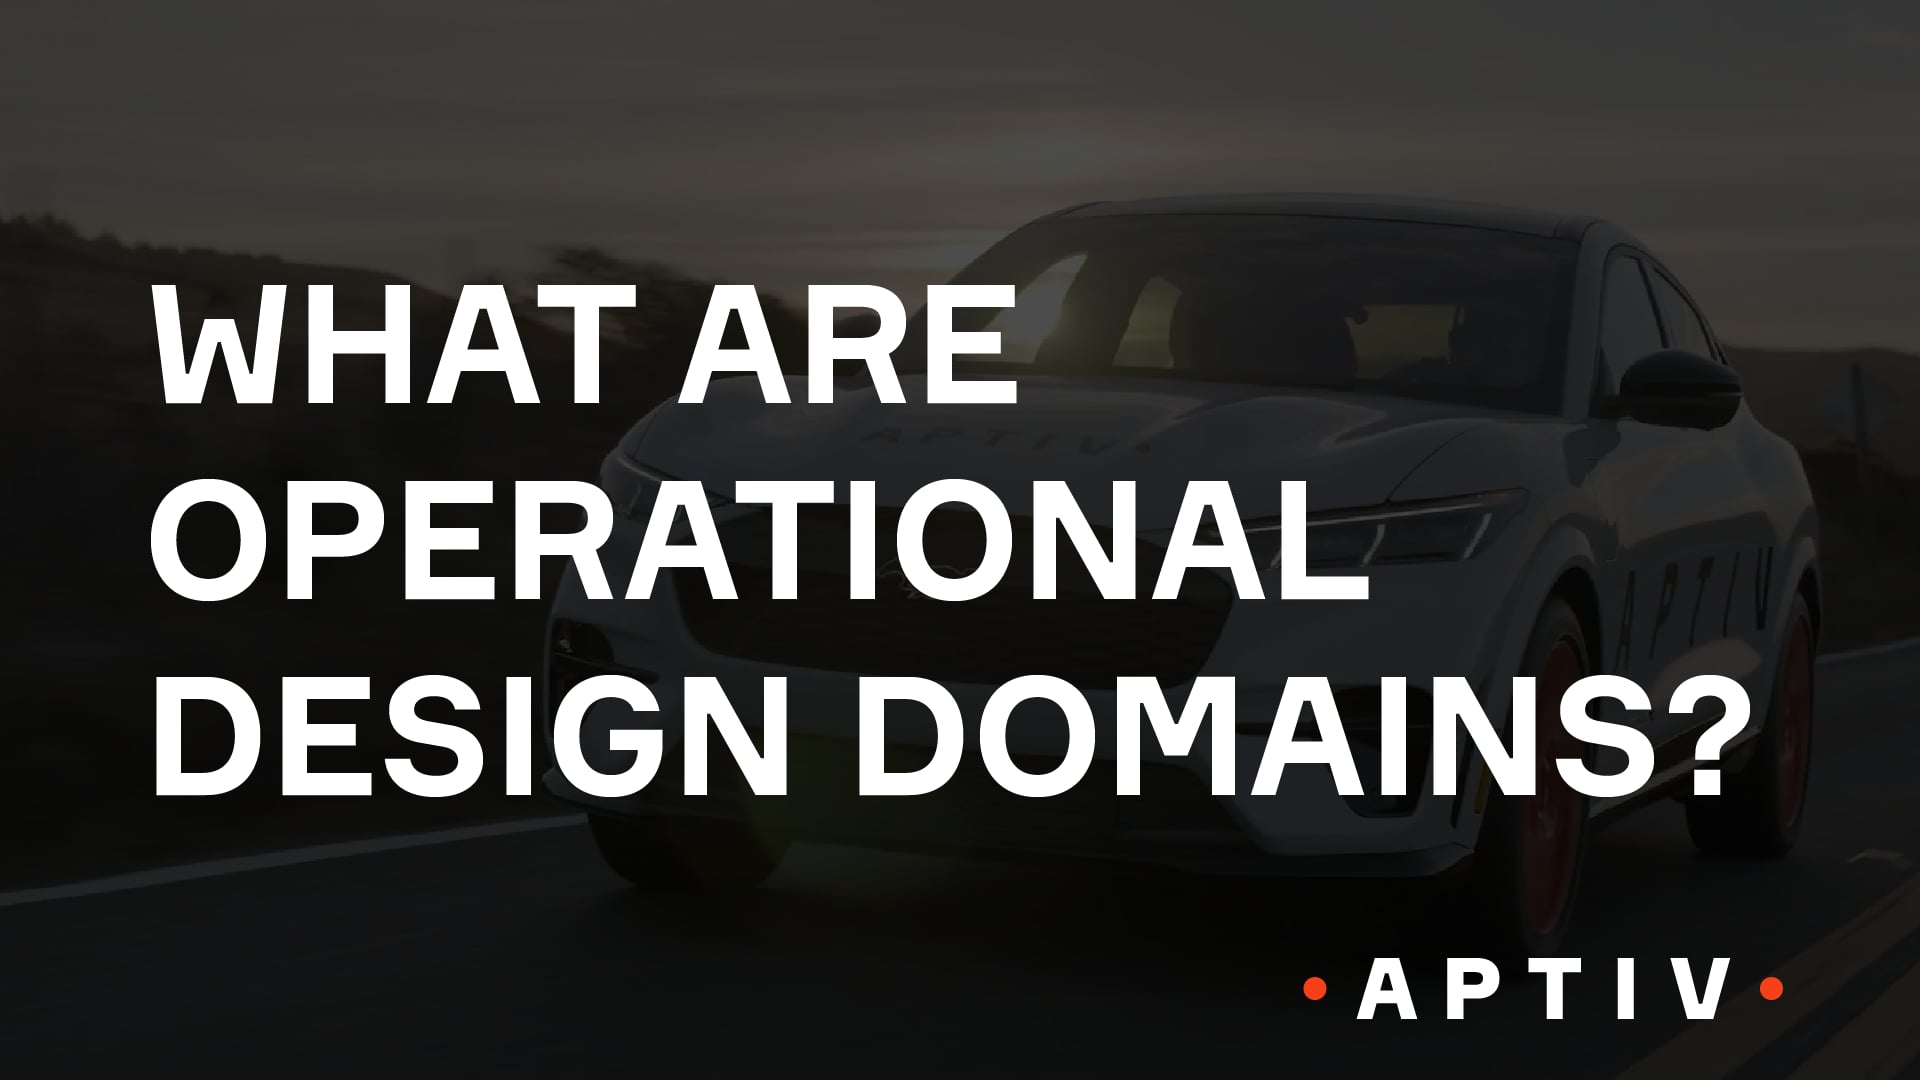 What Are Operational Design Domains?